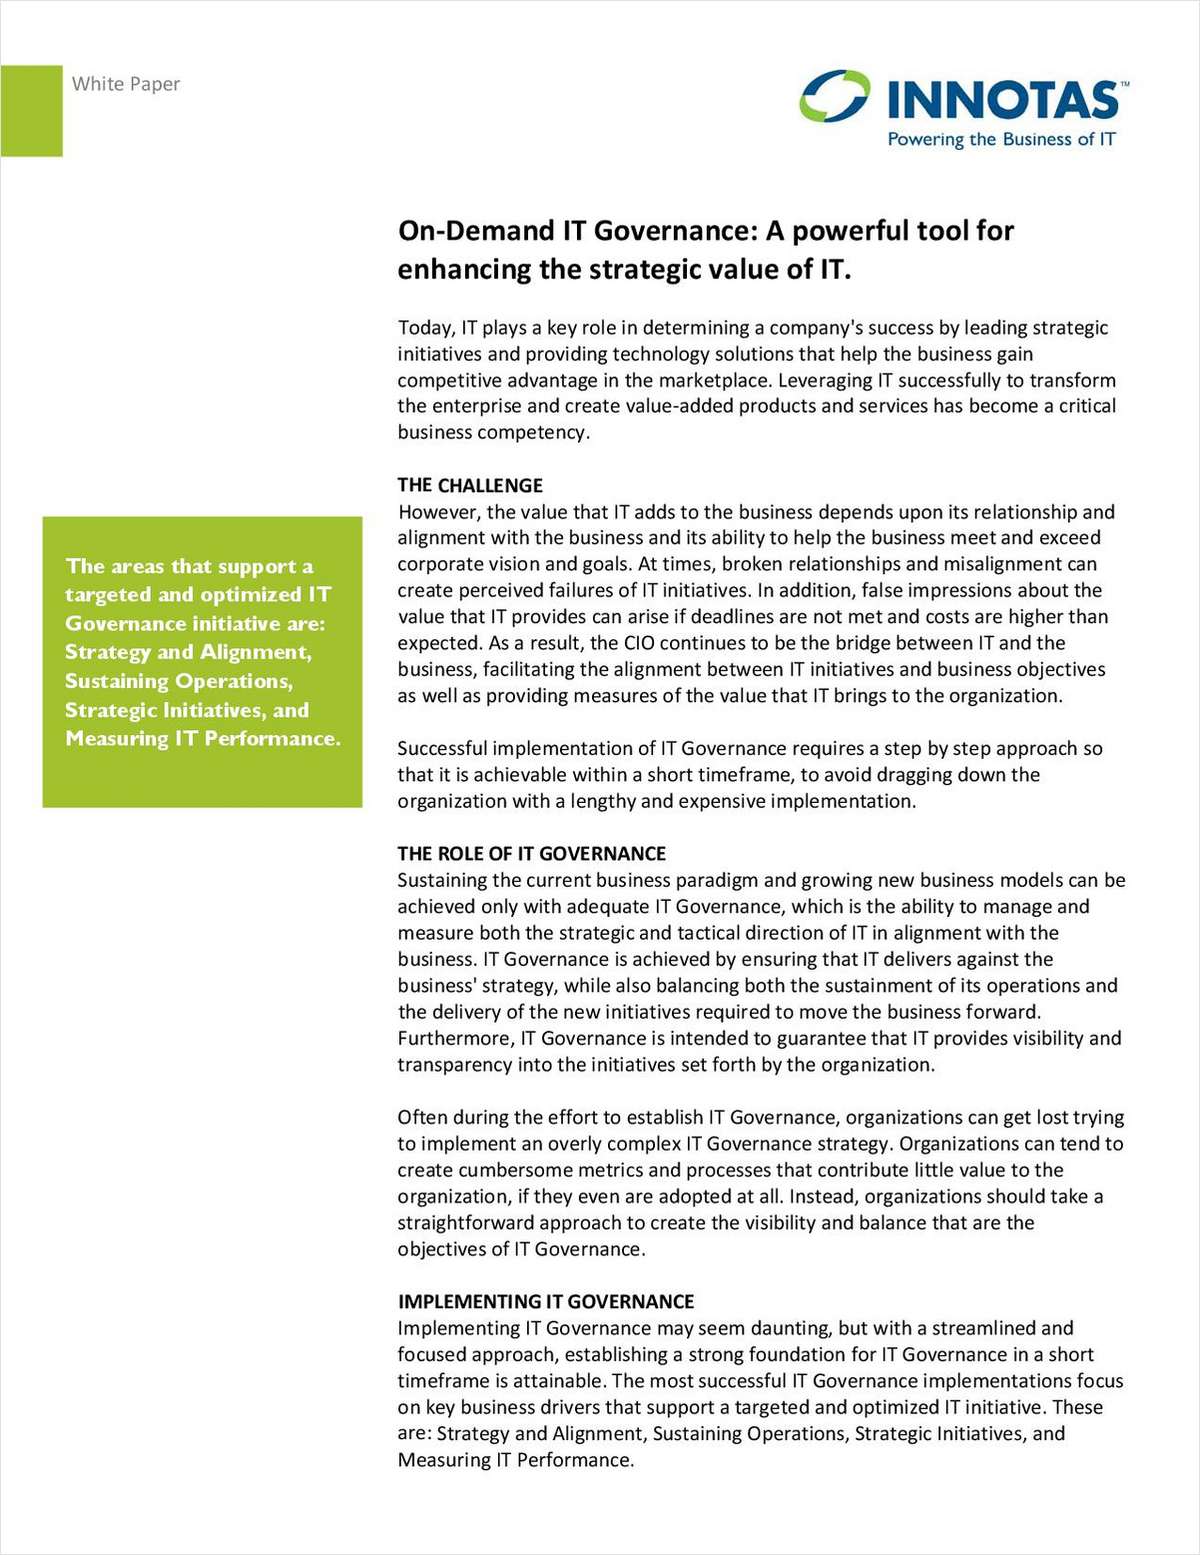 On-Demand IT Governance: A Powerful Tool for Enhancing the Strategic Value of IT